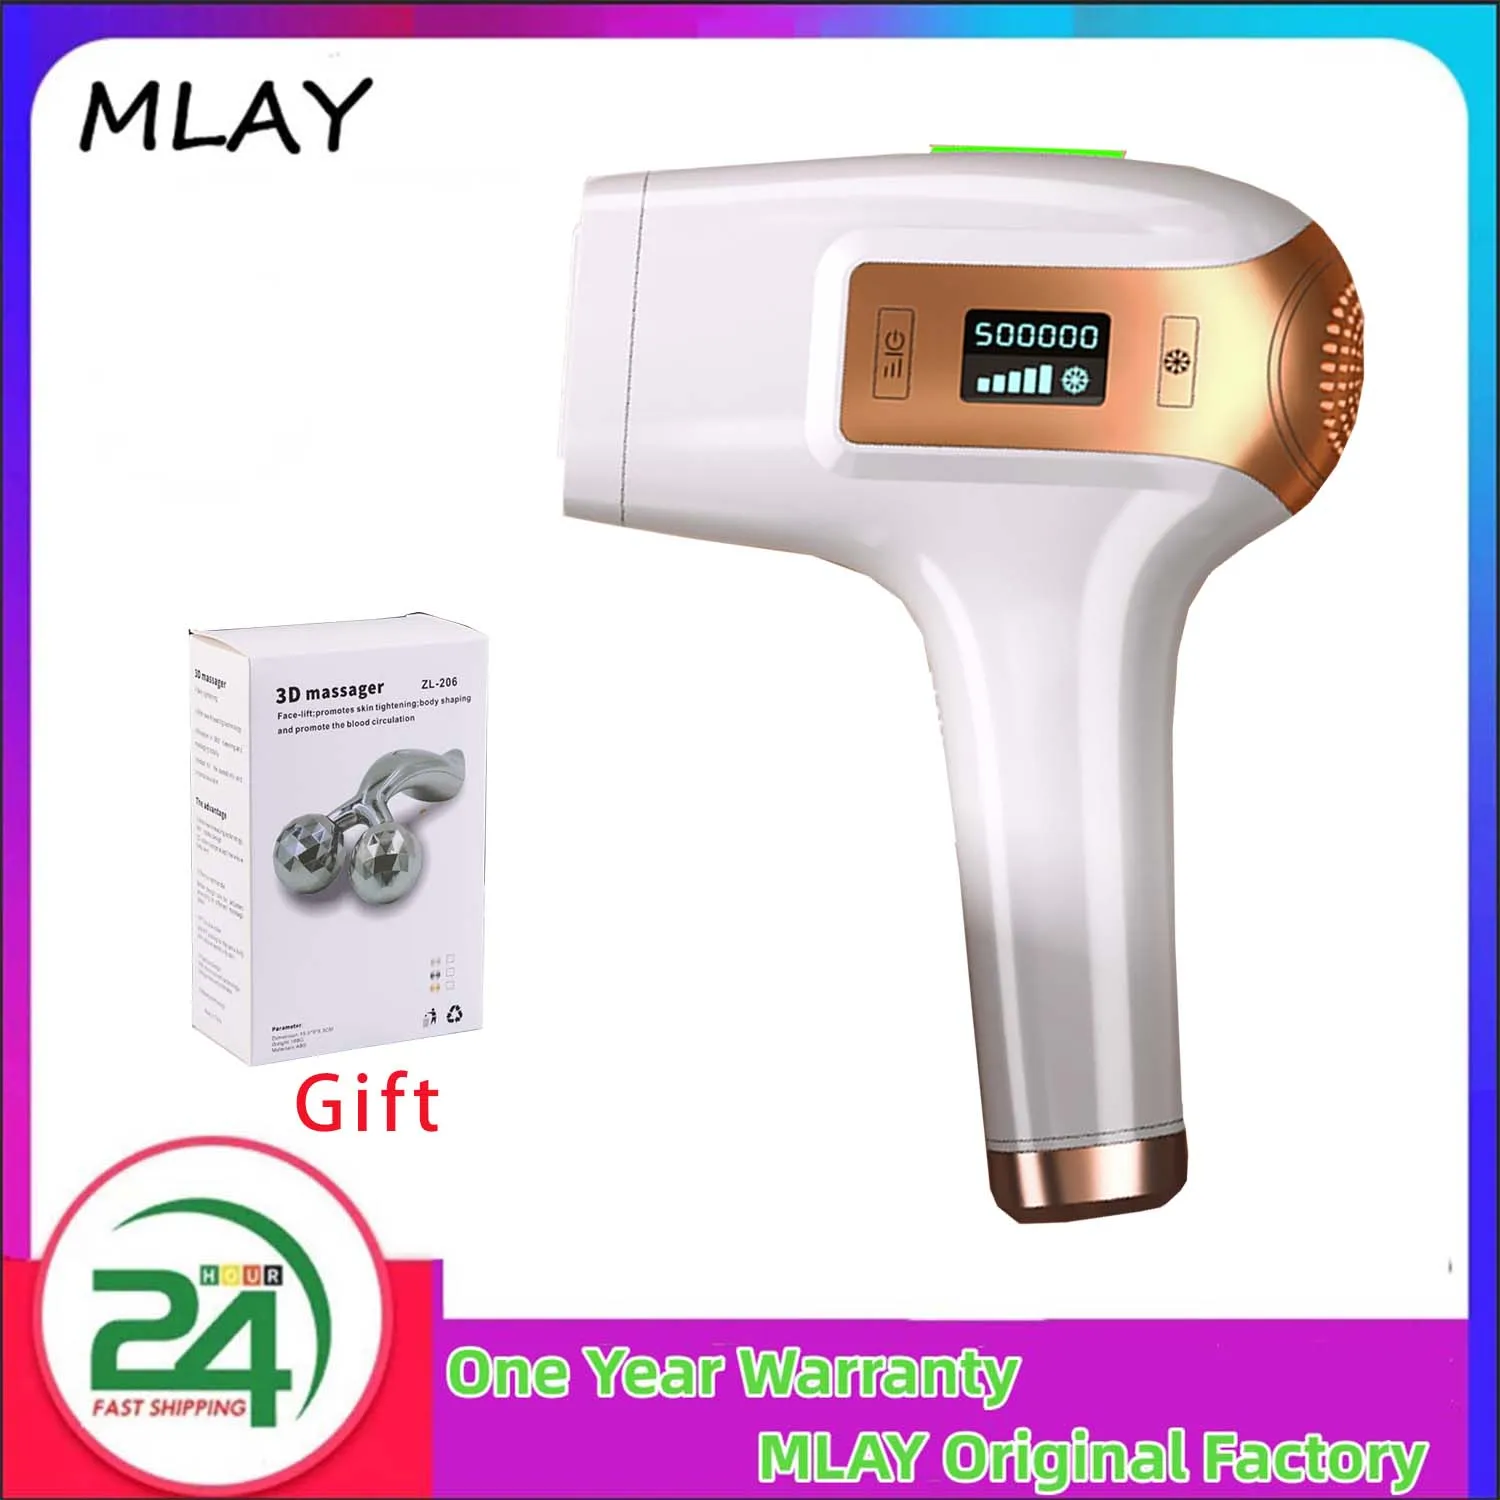 MLAY T5 Laser Ice Cold Hair Removal Device Home Full Body Bikini Epilation Flashes 500000 IPL Hair Removal Painless Dropshipping